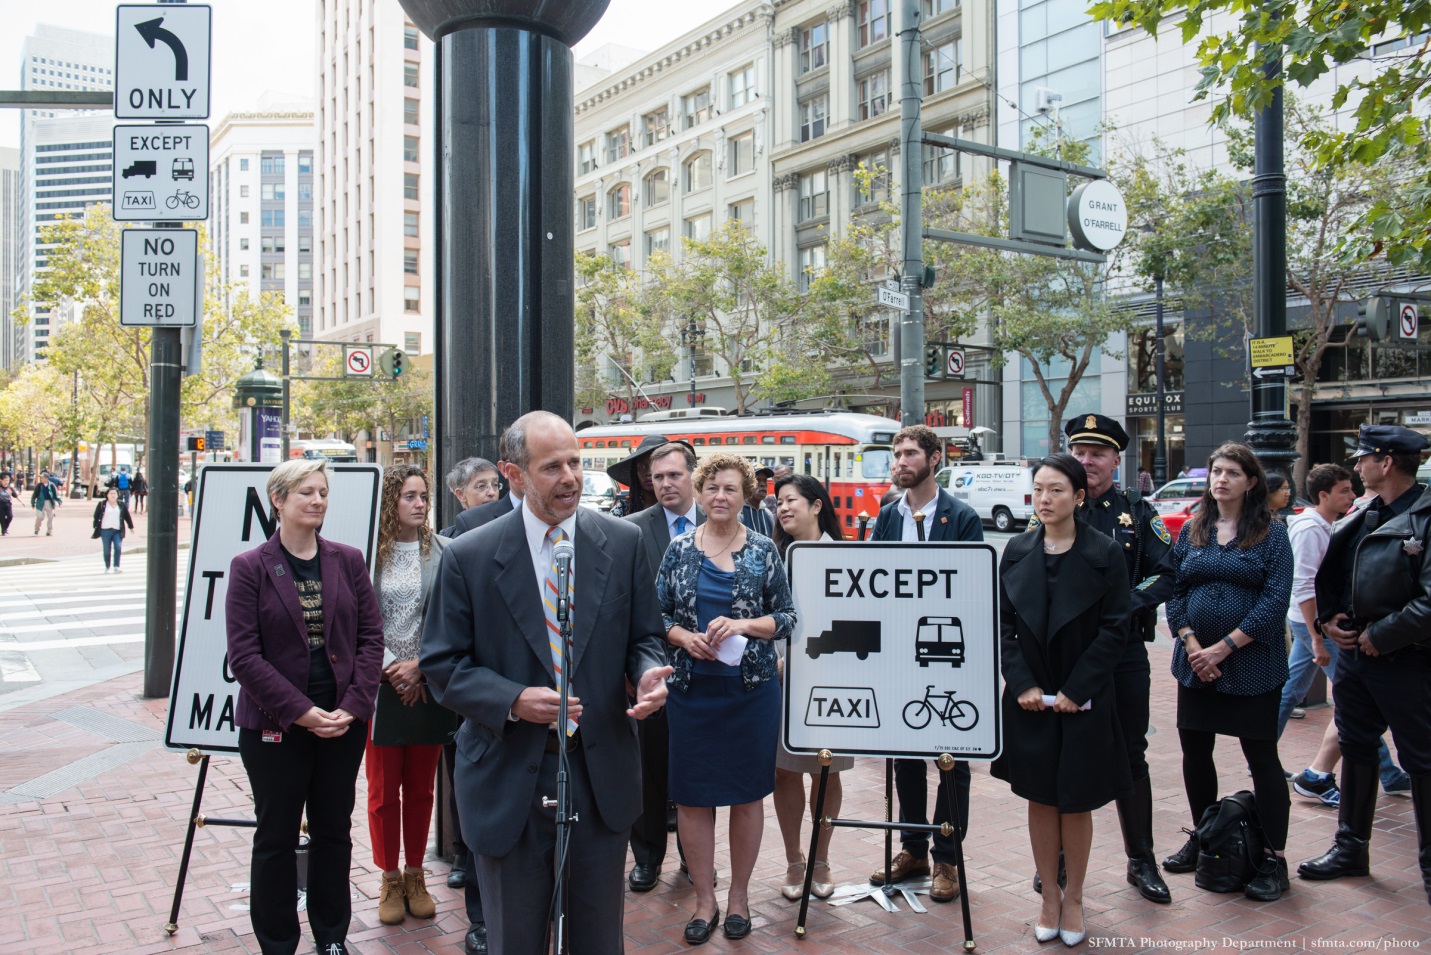 Dignitaries stand in suits next to the new turn restriction signs and speaking to the press during the announcement of the Safer Market Street project.